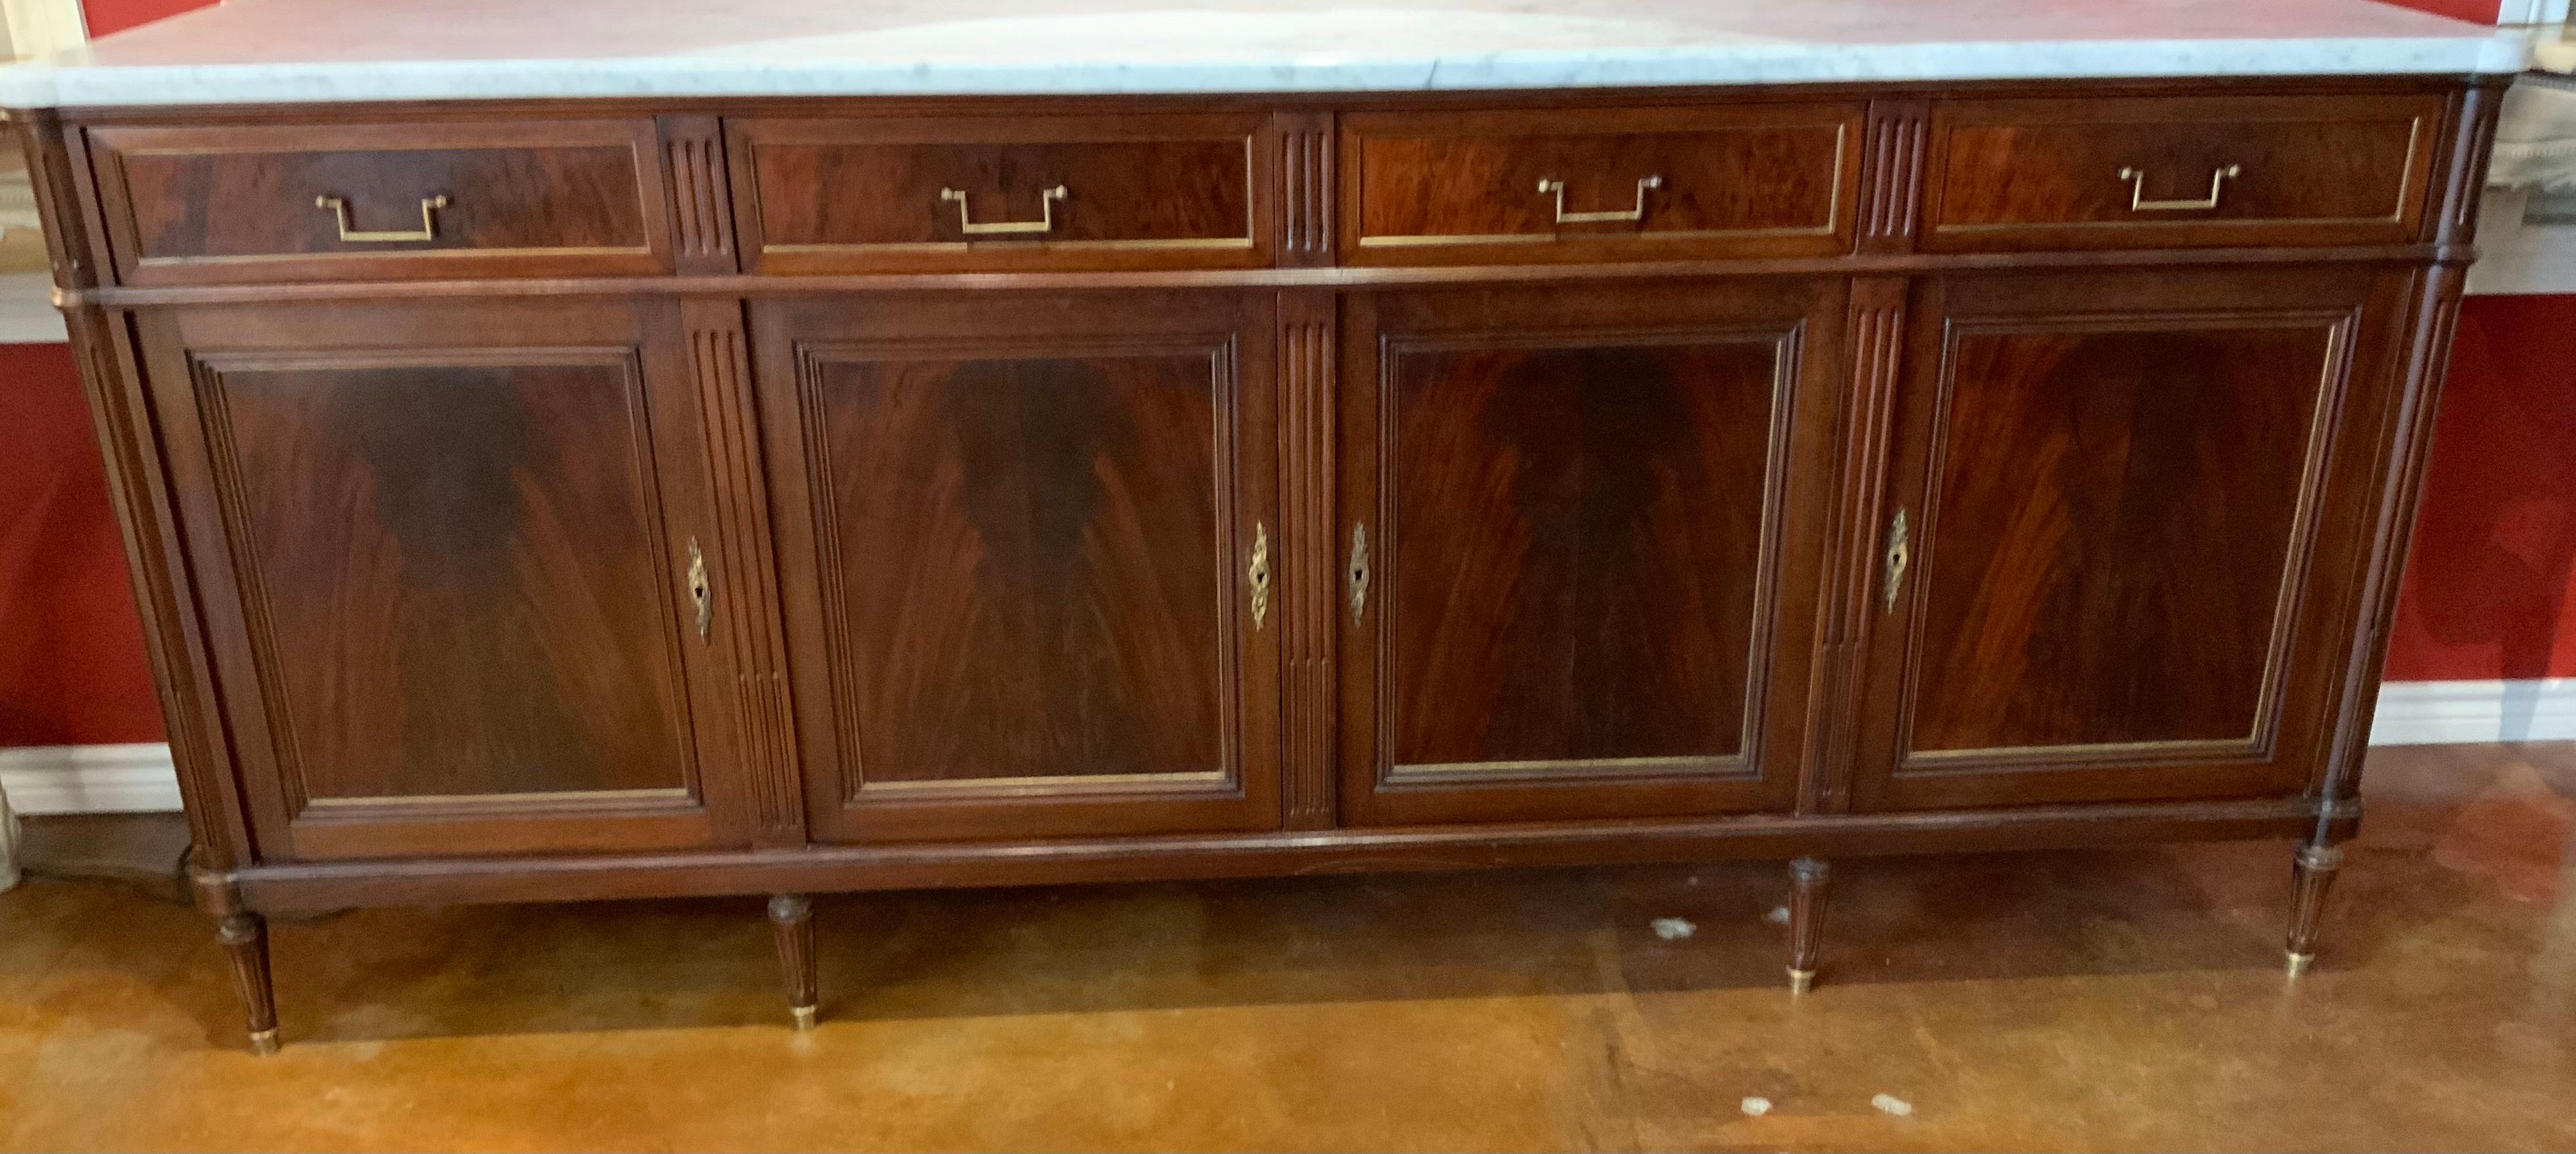 Louis XVI-Style sideboard/buffet mahogany with white marble top For Sale 5